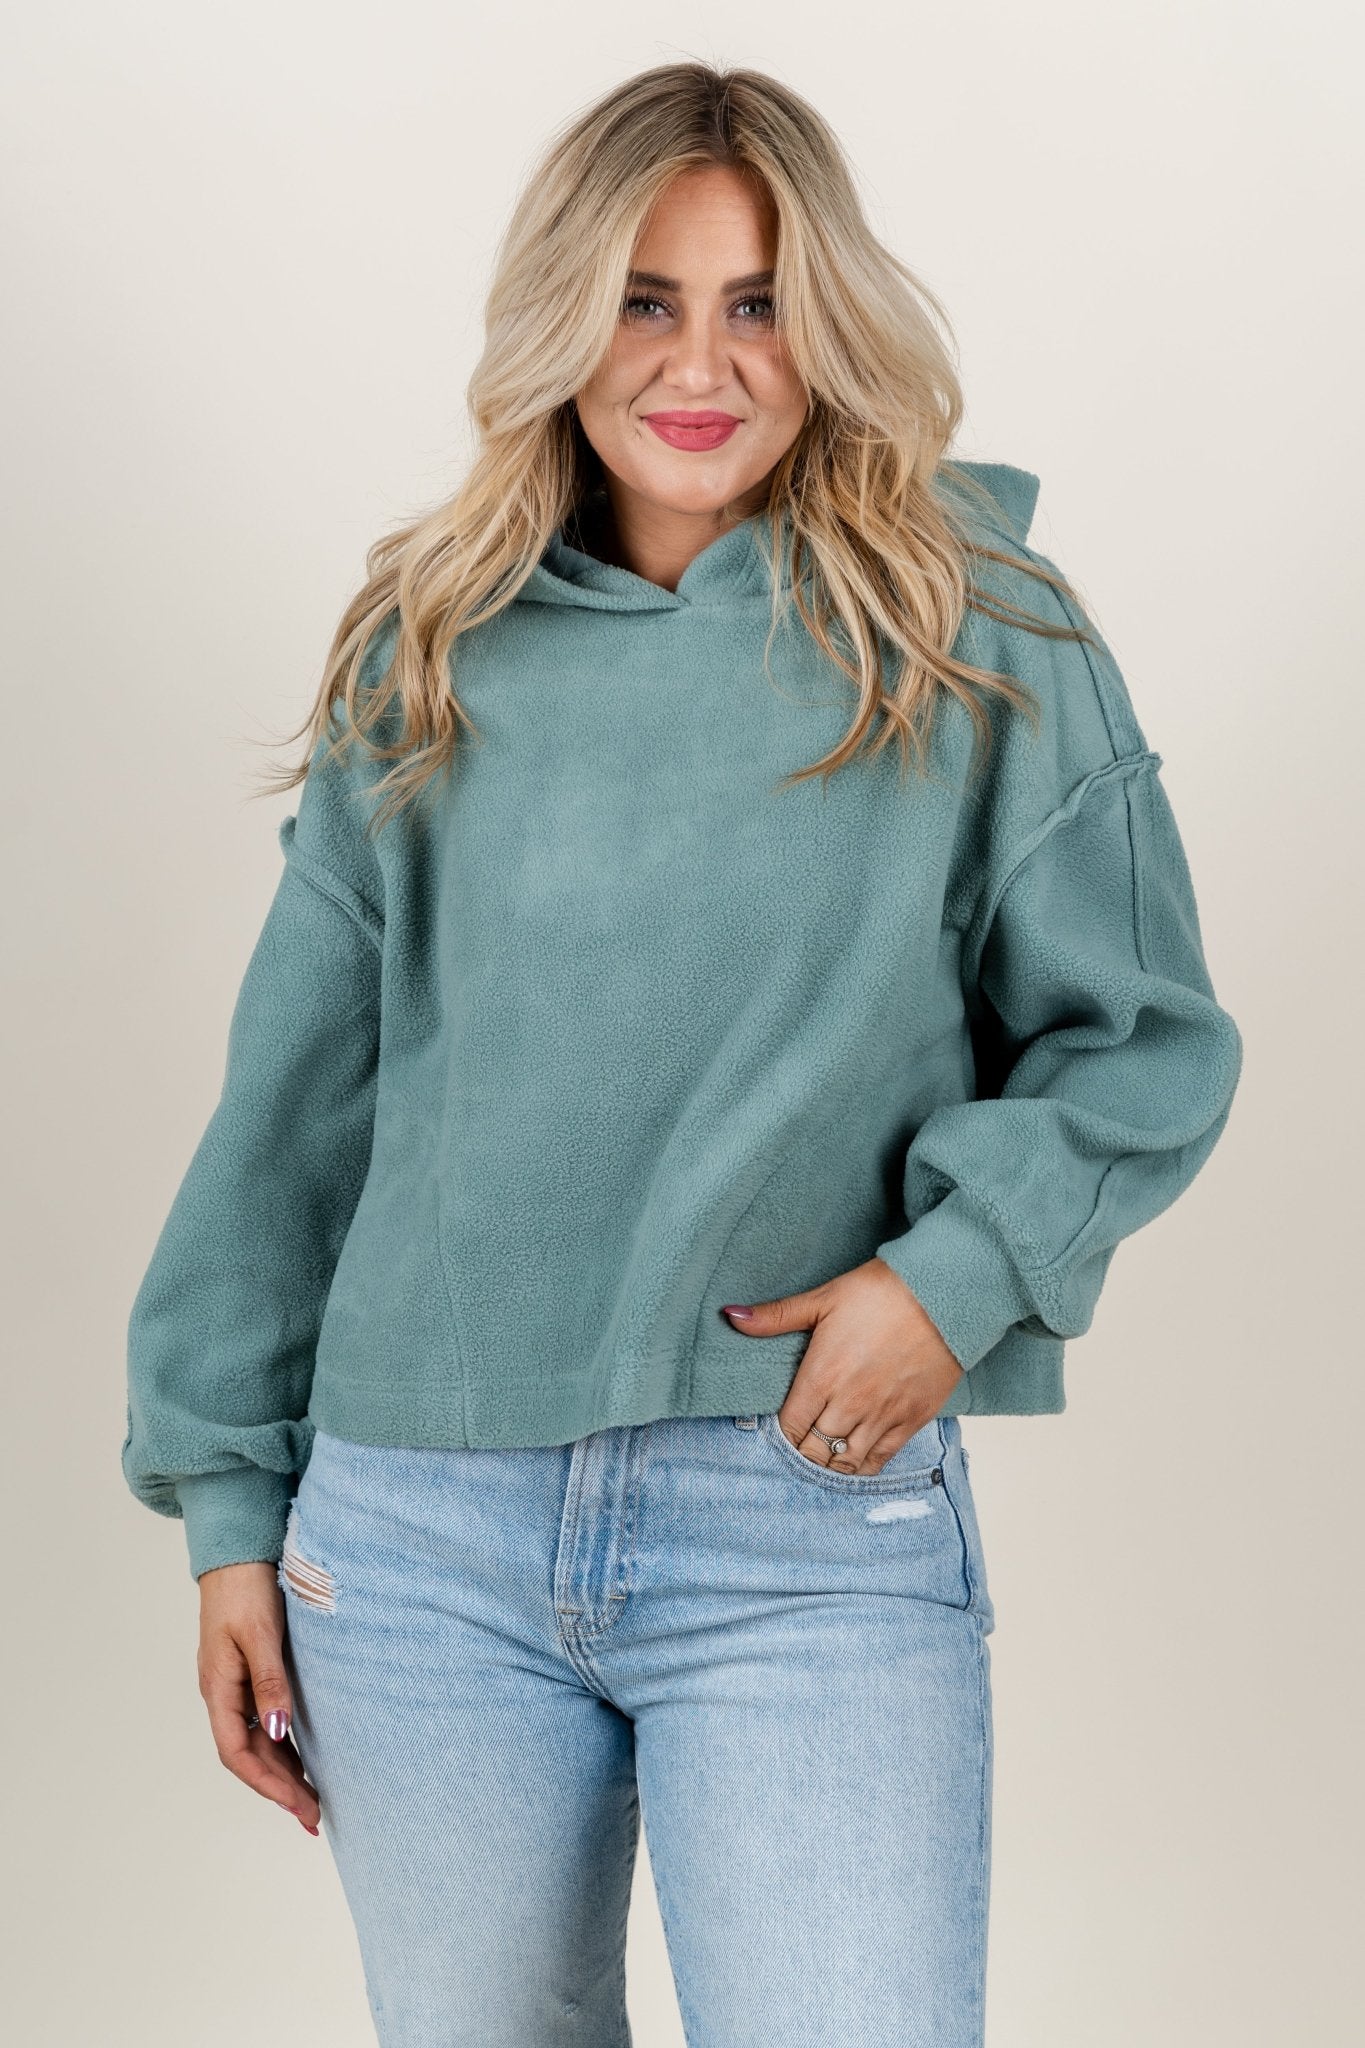 Teddy hoodie top sage - Affordable Sweater - Boutique Sweaters at Lush Fashion Lounge Boutique in Oklahoma City